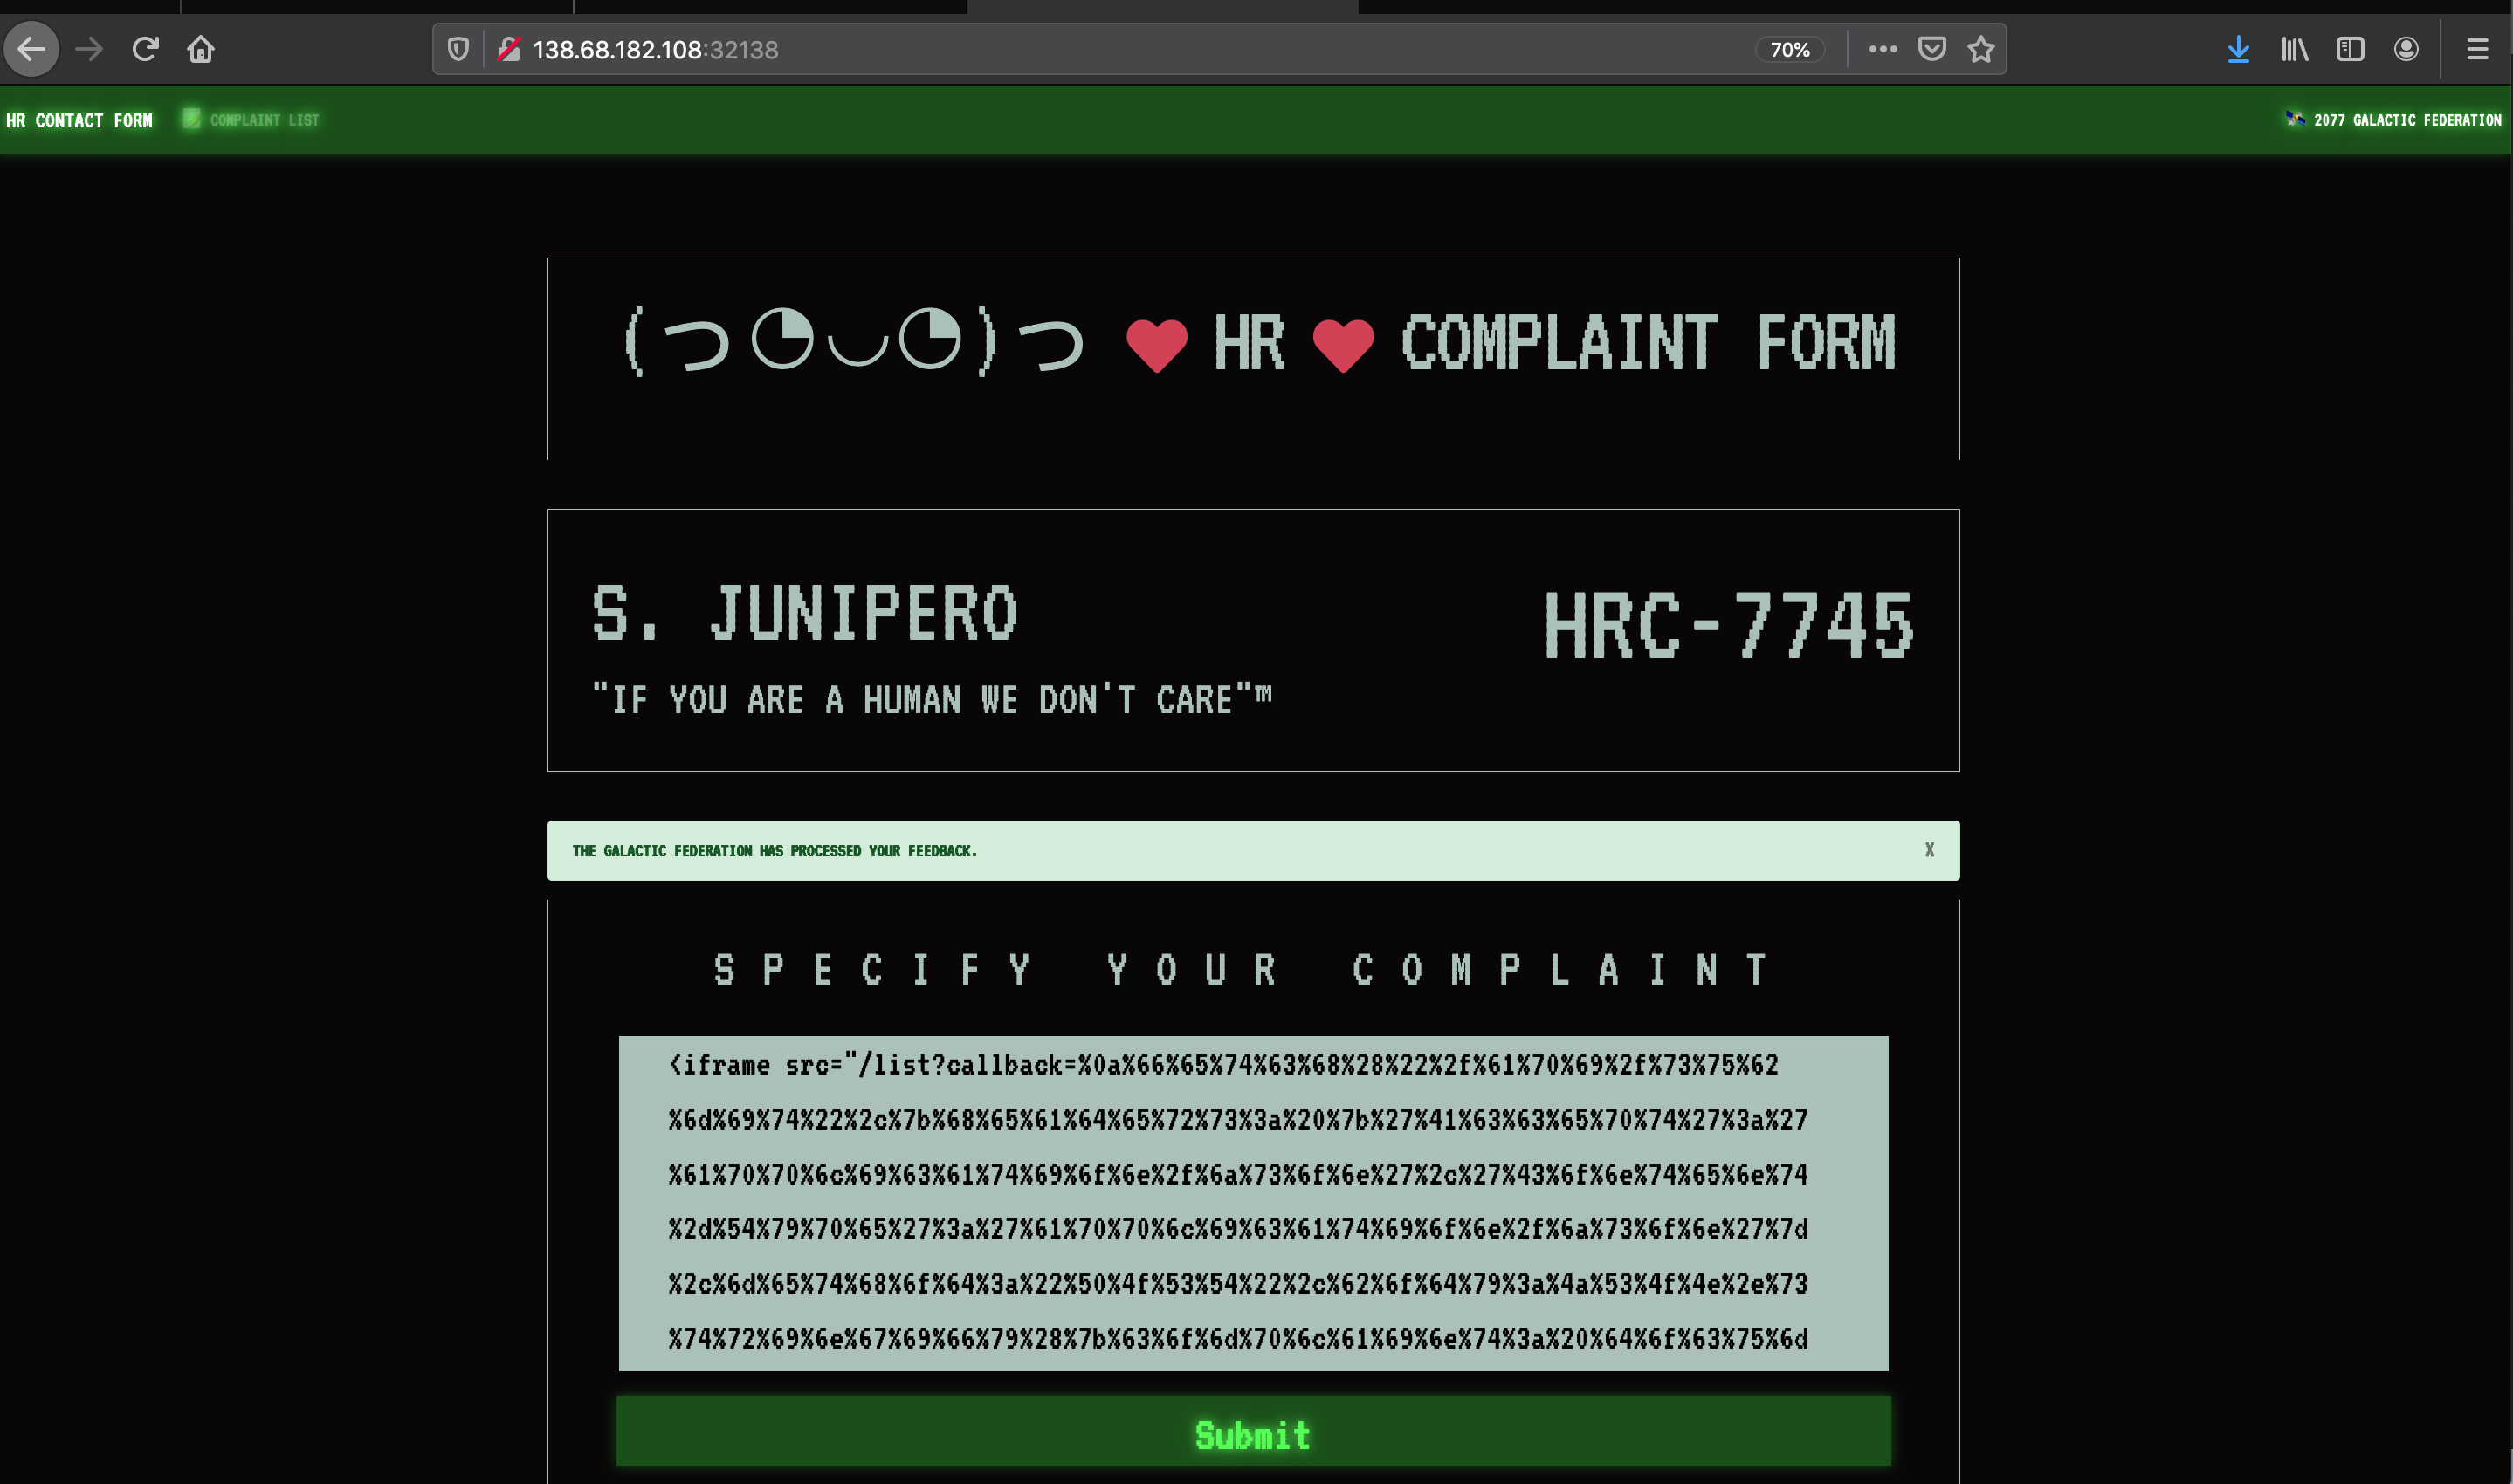 https://manhnv.com/images/posts/ctf/Cyber-Apocalypse-2021/Alien-complaint-form/Screen_Shot_2021-04-24_at_23.37.47.png